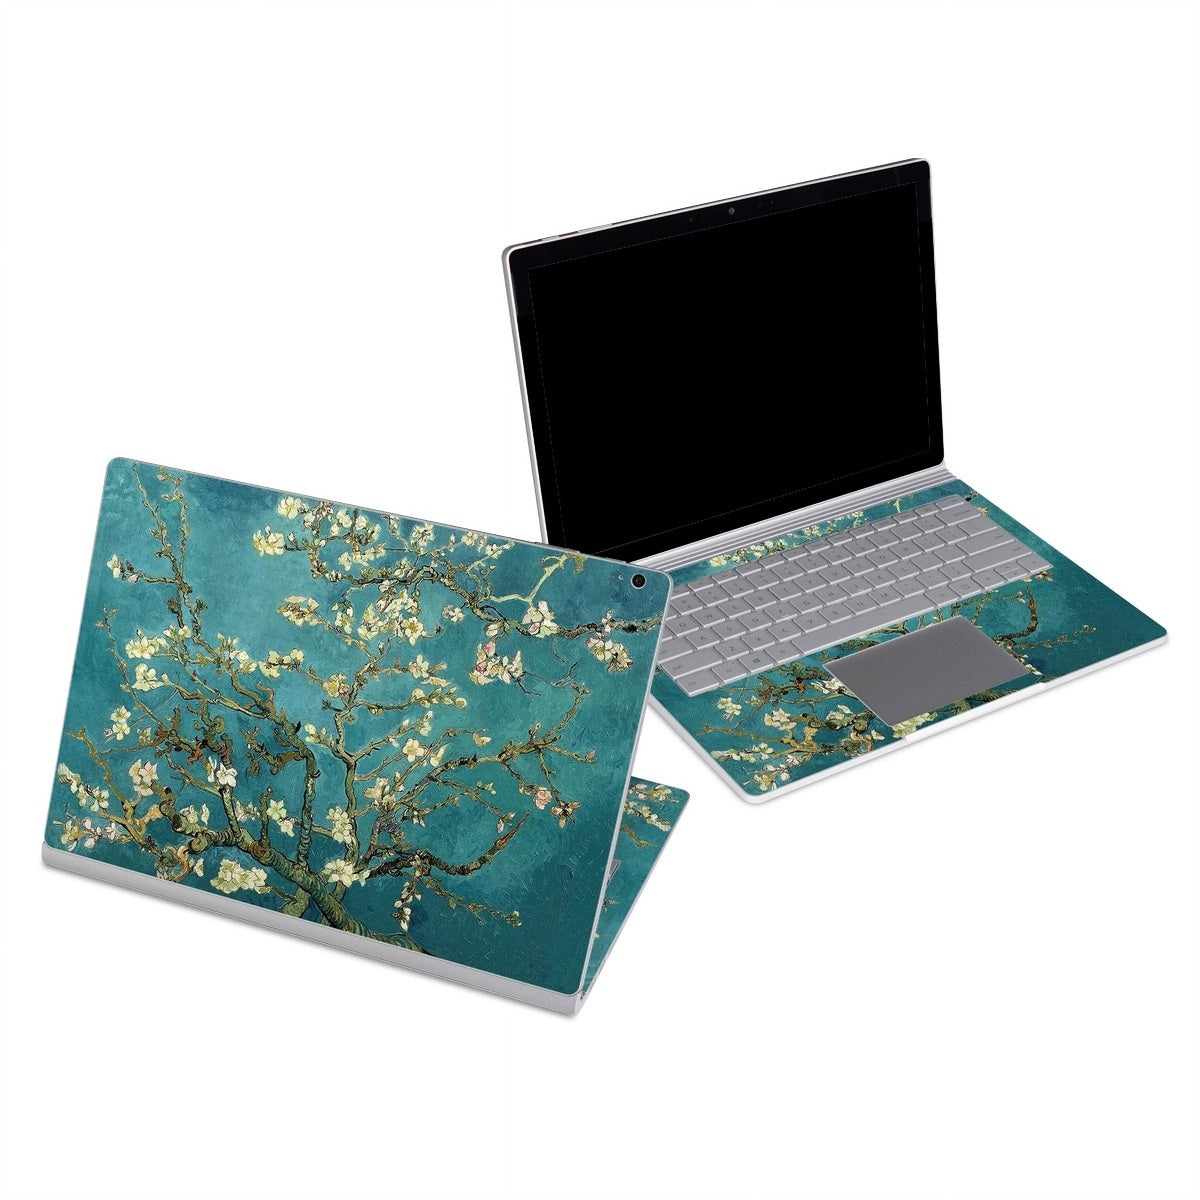 Blossoming Almond Tree - Microsoft Surface Book Skin